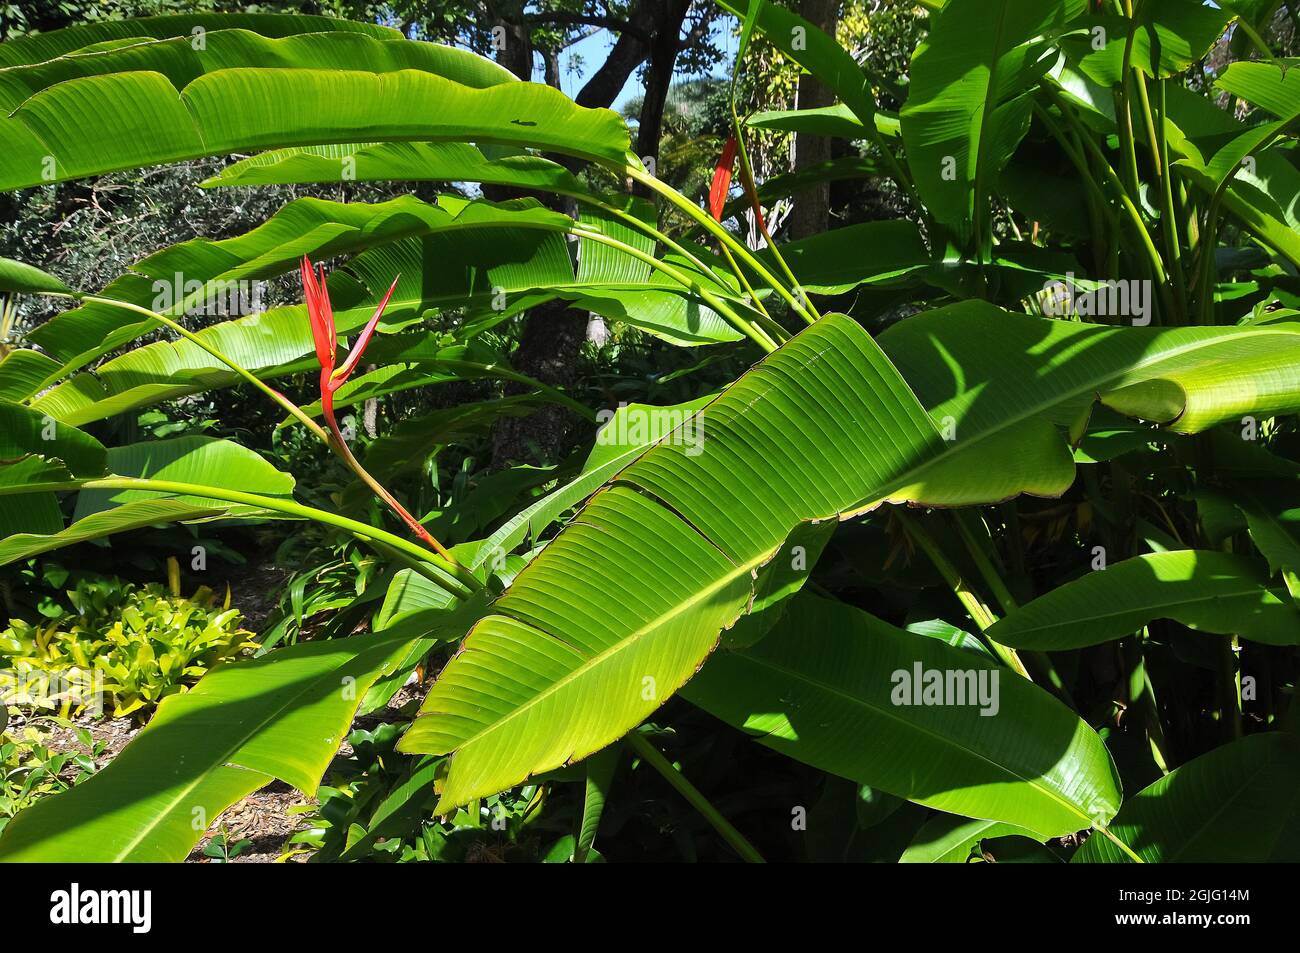 Lobster-claw Heliconia, Heliconia schiedeana, America Stock Photo